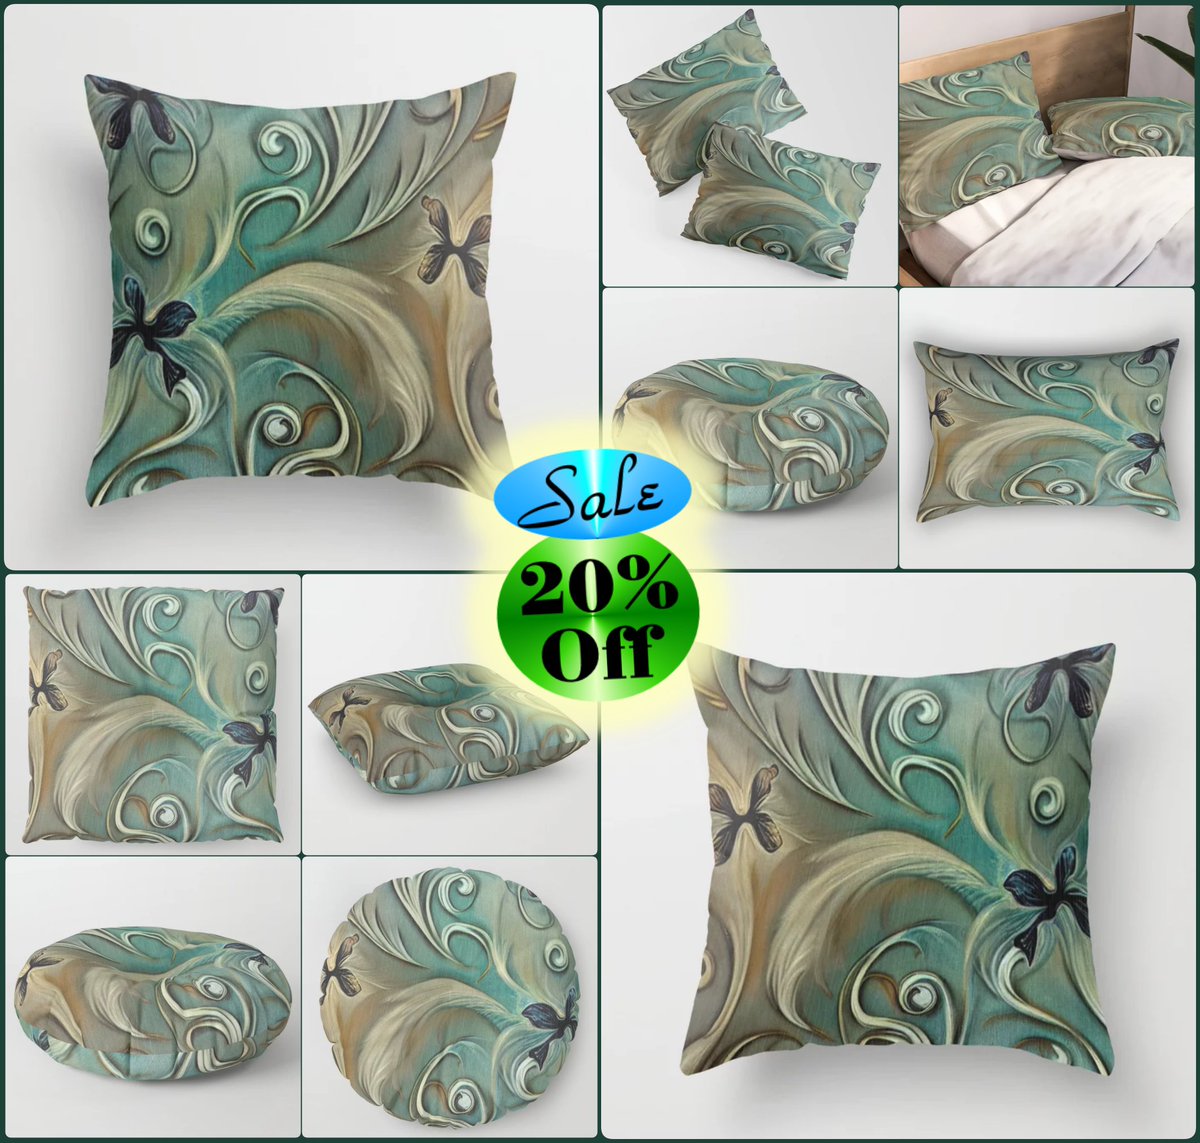 *SALE 20% Off*
Patience Throw Pillow~by Art Falaxy~
~Unique Pillows!~
#artfalaxy #art #bedroom #pillows #homedecor #society6 #Society6max #swirls #modern #trendy #accessories #accents #floorpillows #pillows #shams #blankets

society6.com/product/patien…
society6.com/product/patien…